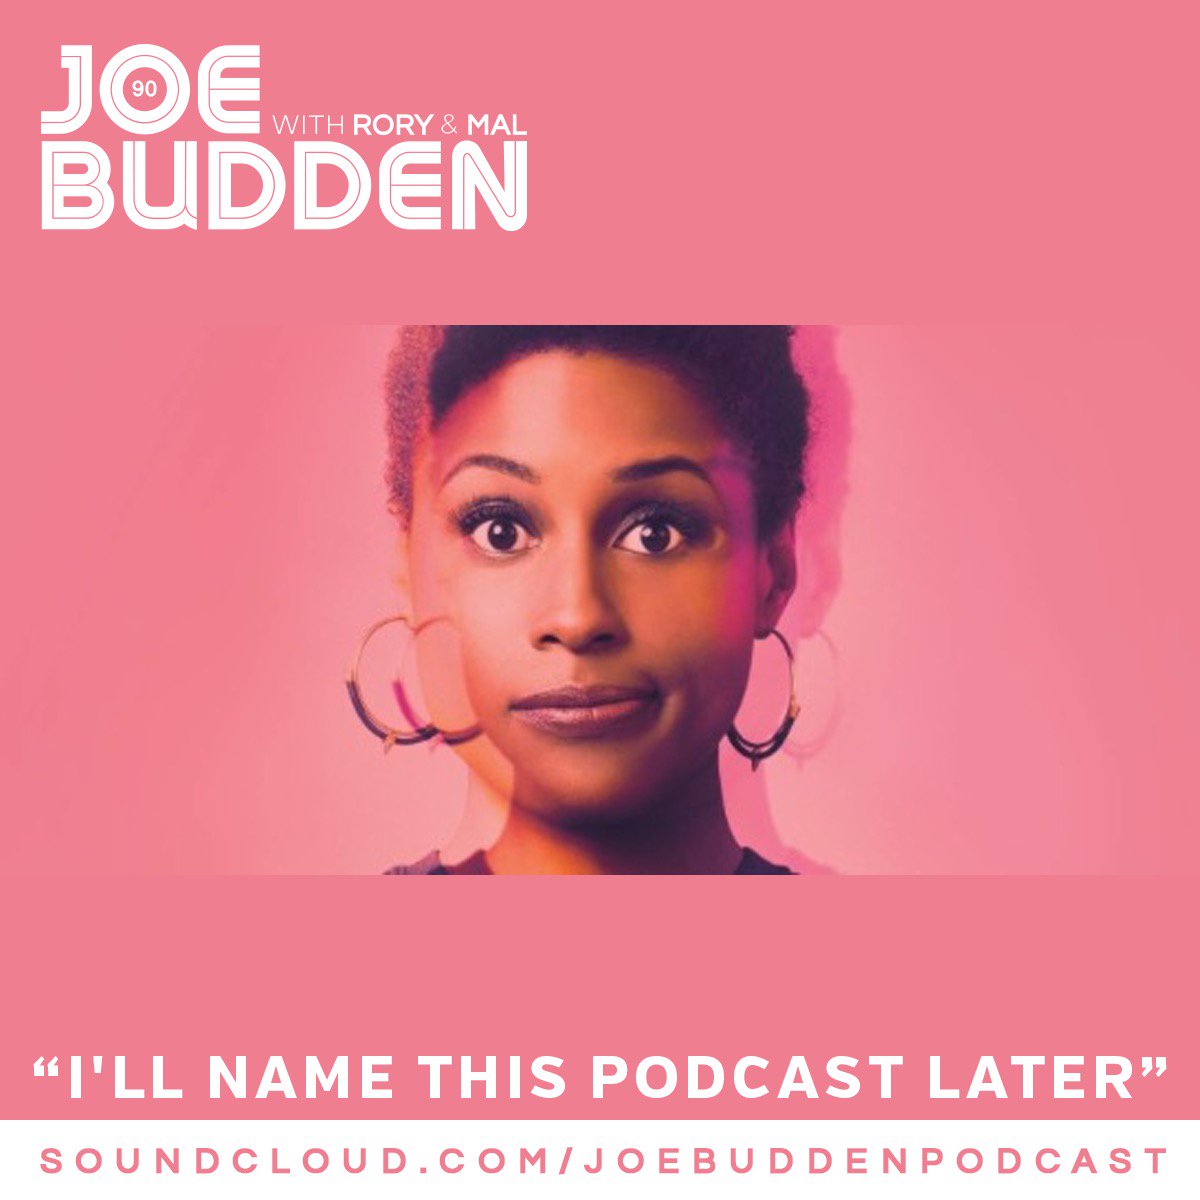 Joe Budden - I'll Name This Podcast Later (Episode 90) with Rory & Mal - miixtapechiick1200 x 1200